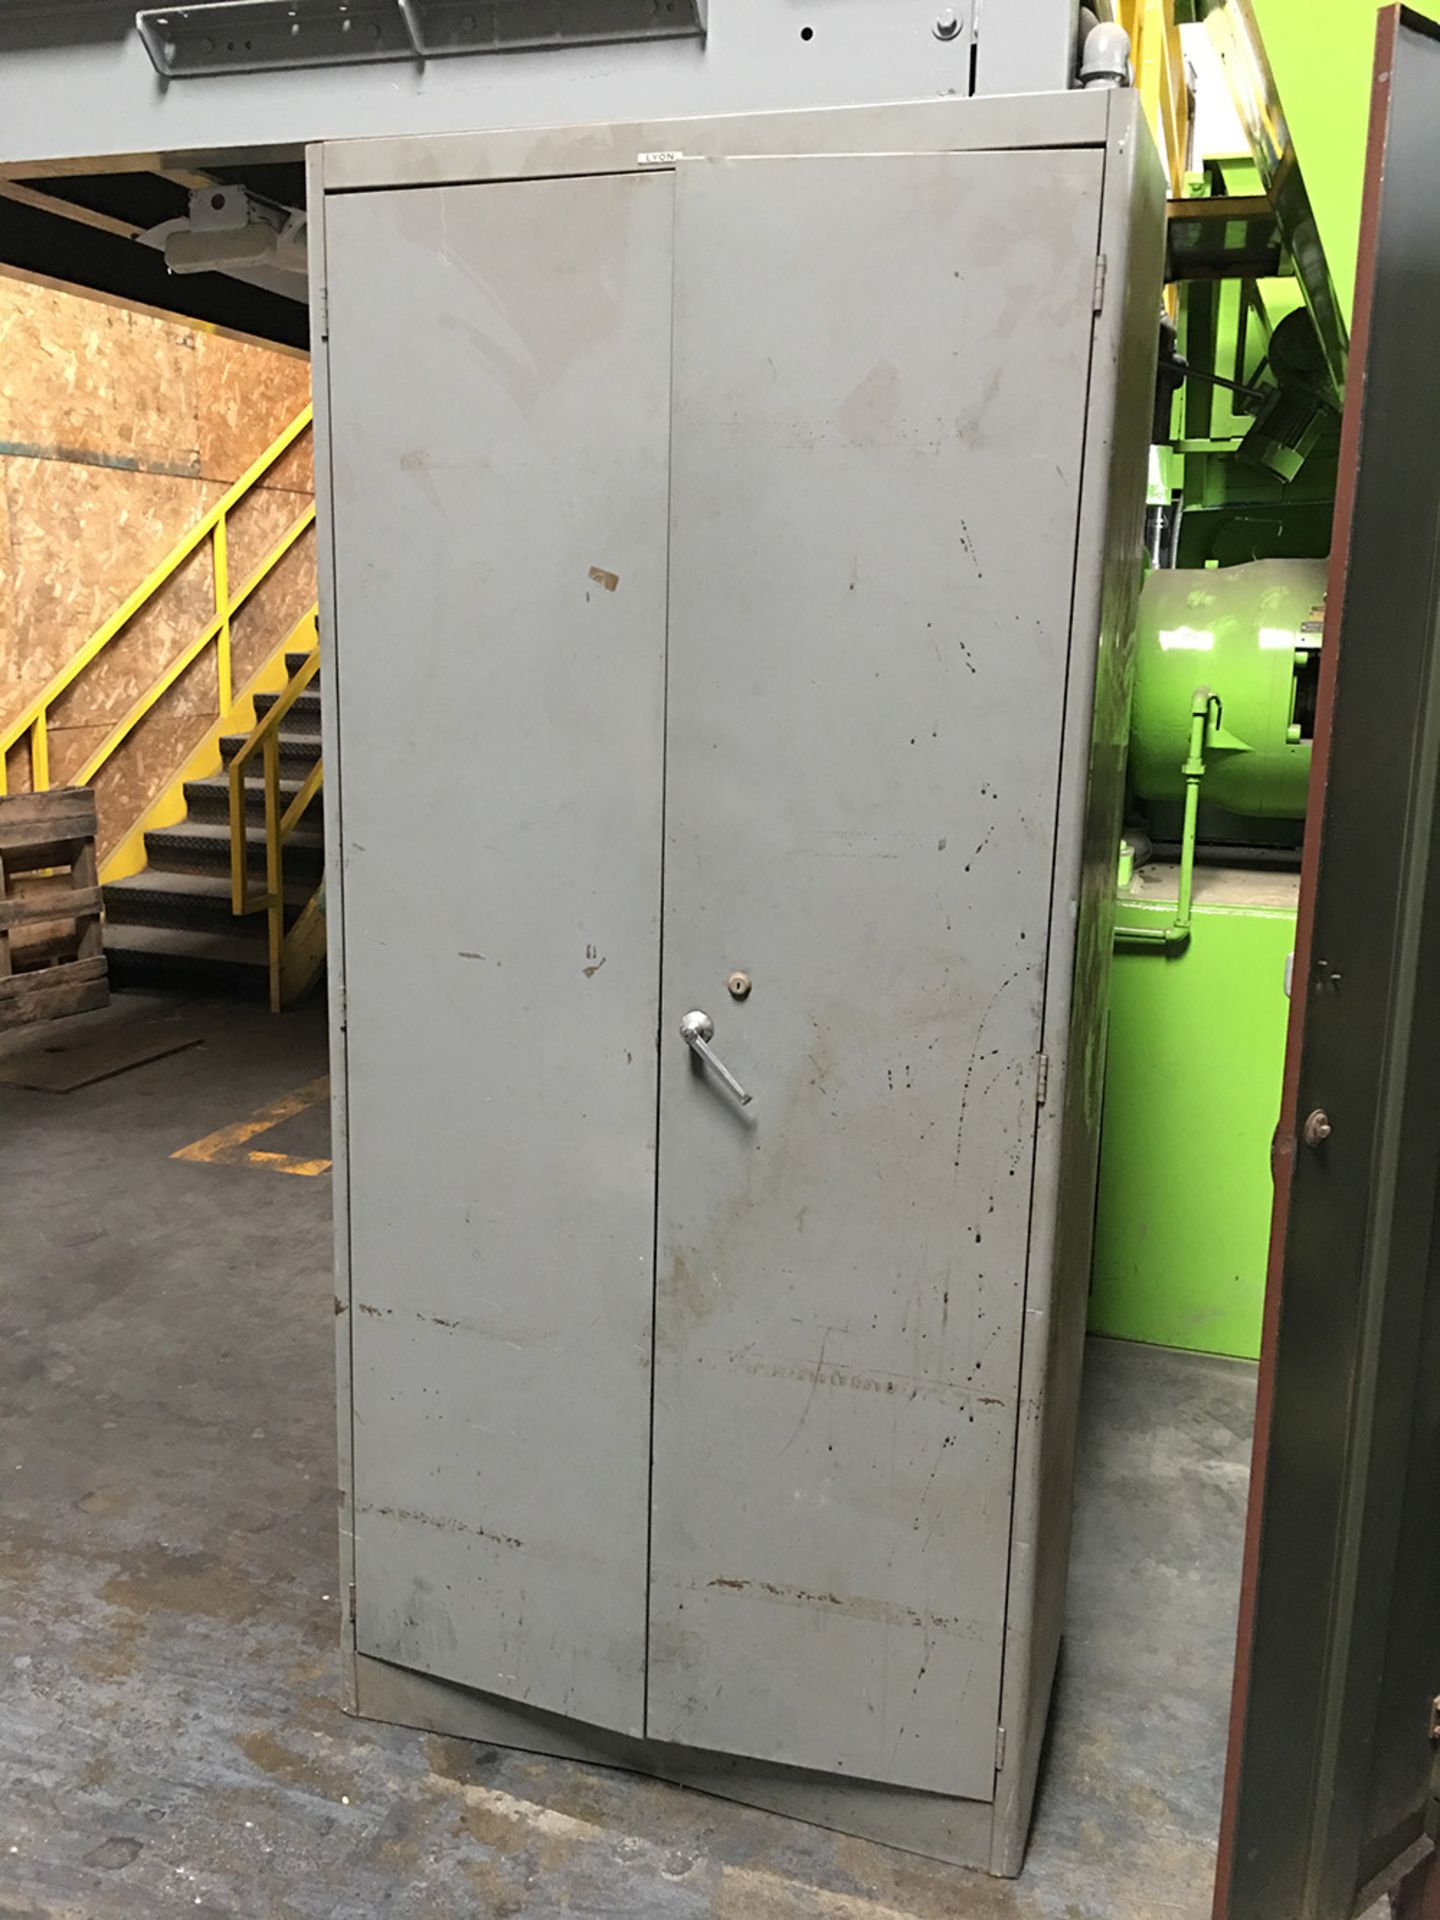 36" X 21" X 78 CABINET WITH CONTENTS